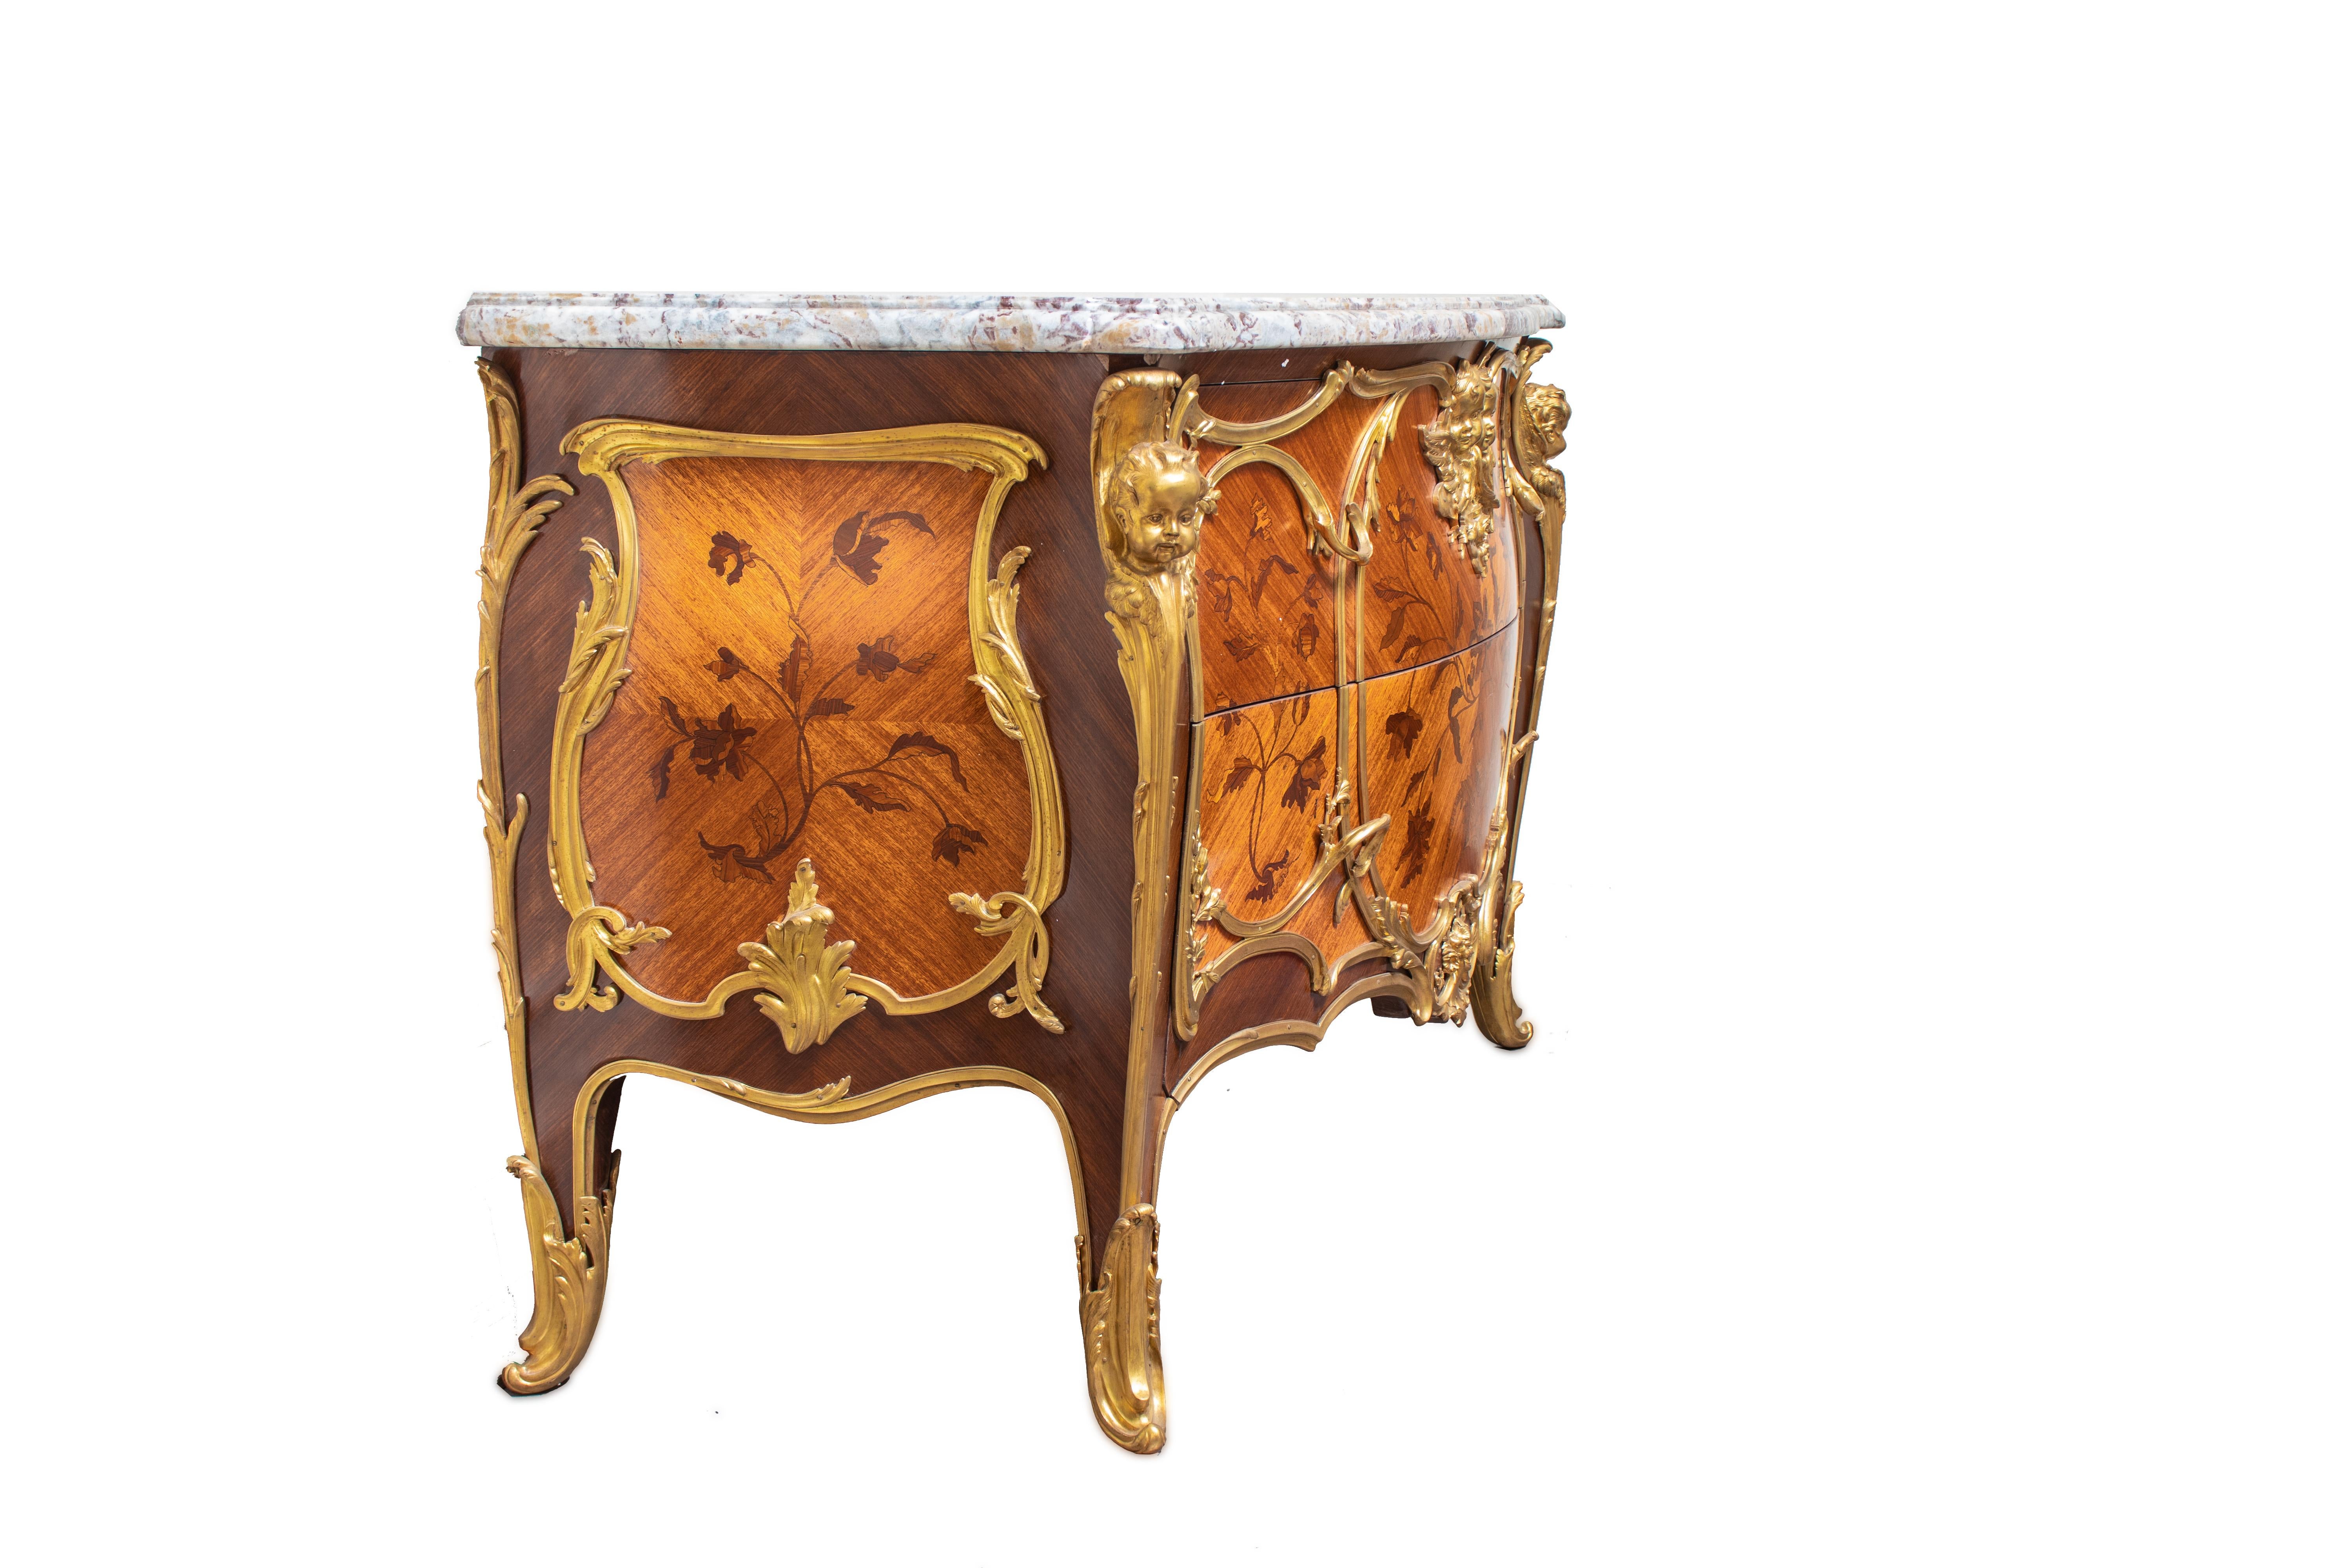 19th Century Pair of French Commodes in Louis XV style with Ormolu Mounts and Marquetry For Sale